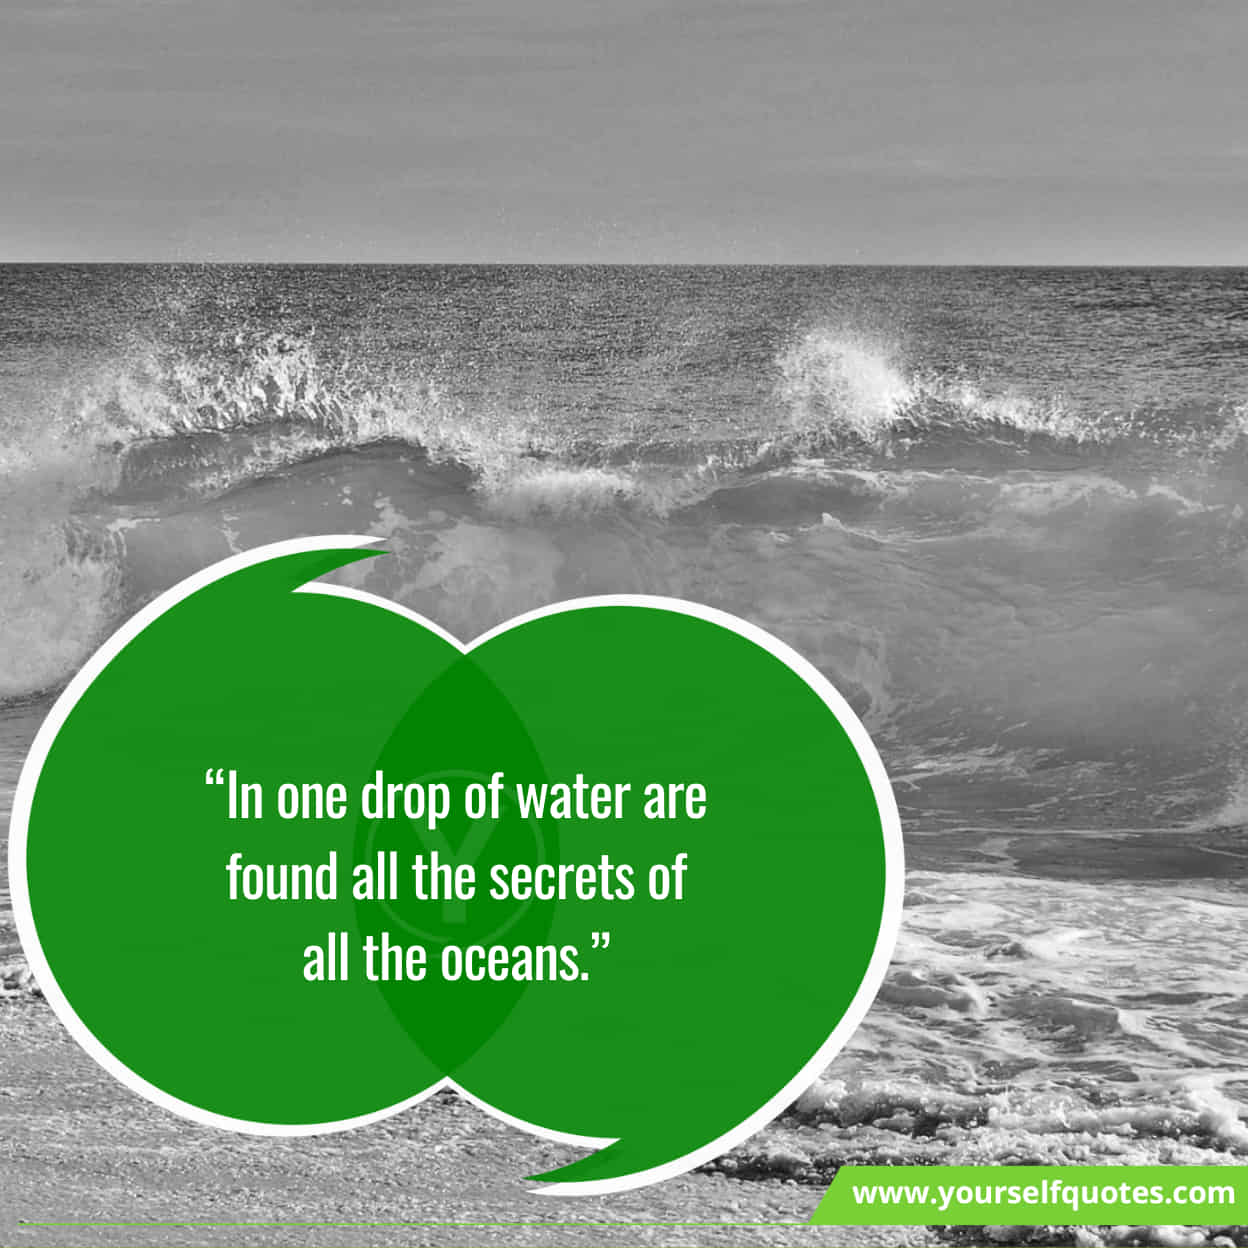 Best Quotes About Water